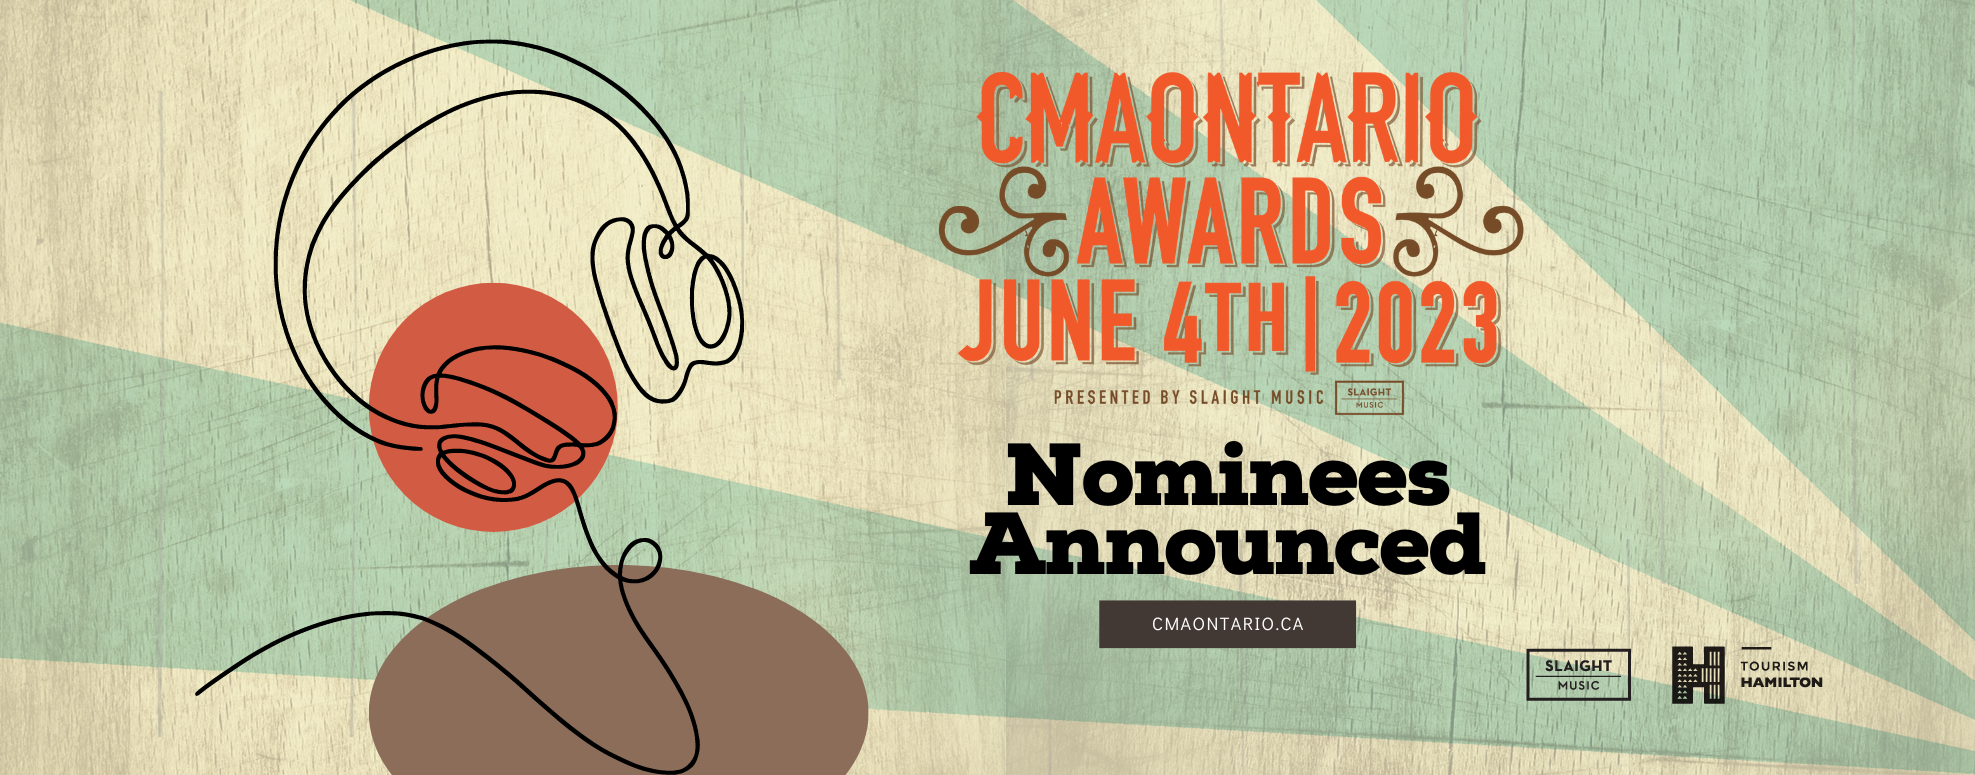 CMAOntario Video of the Year Nomination